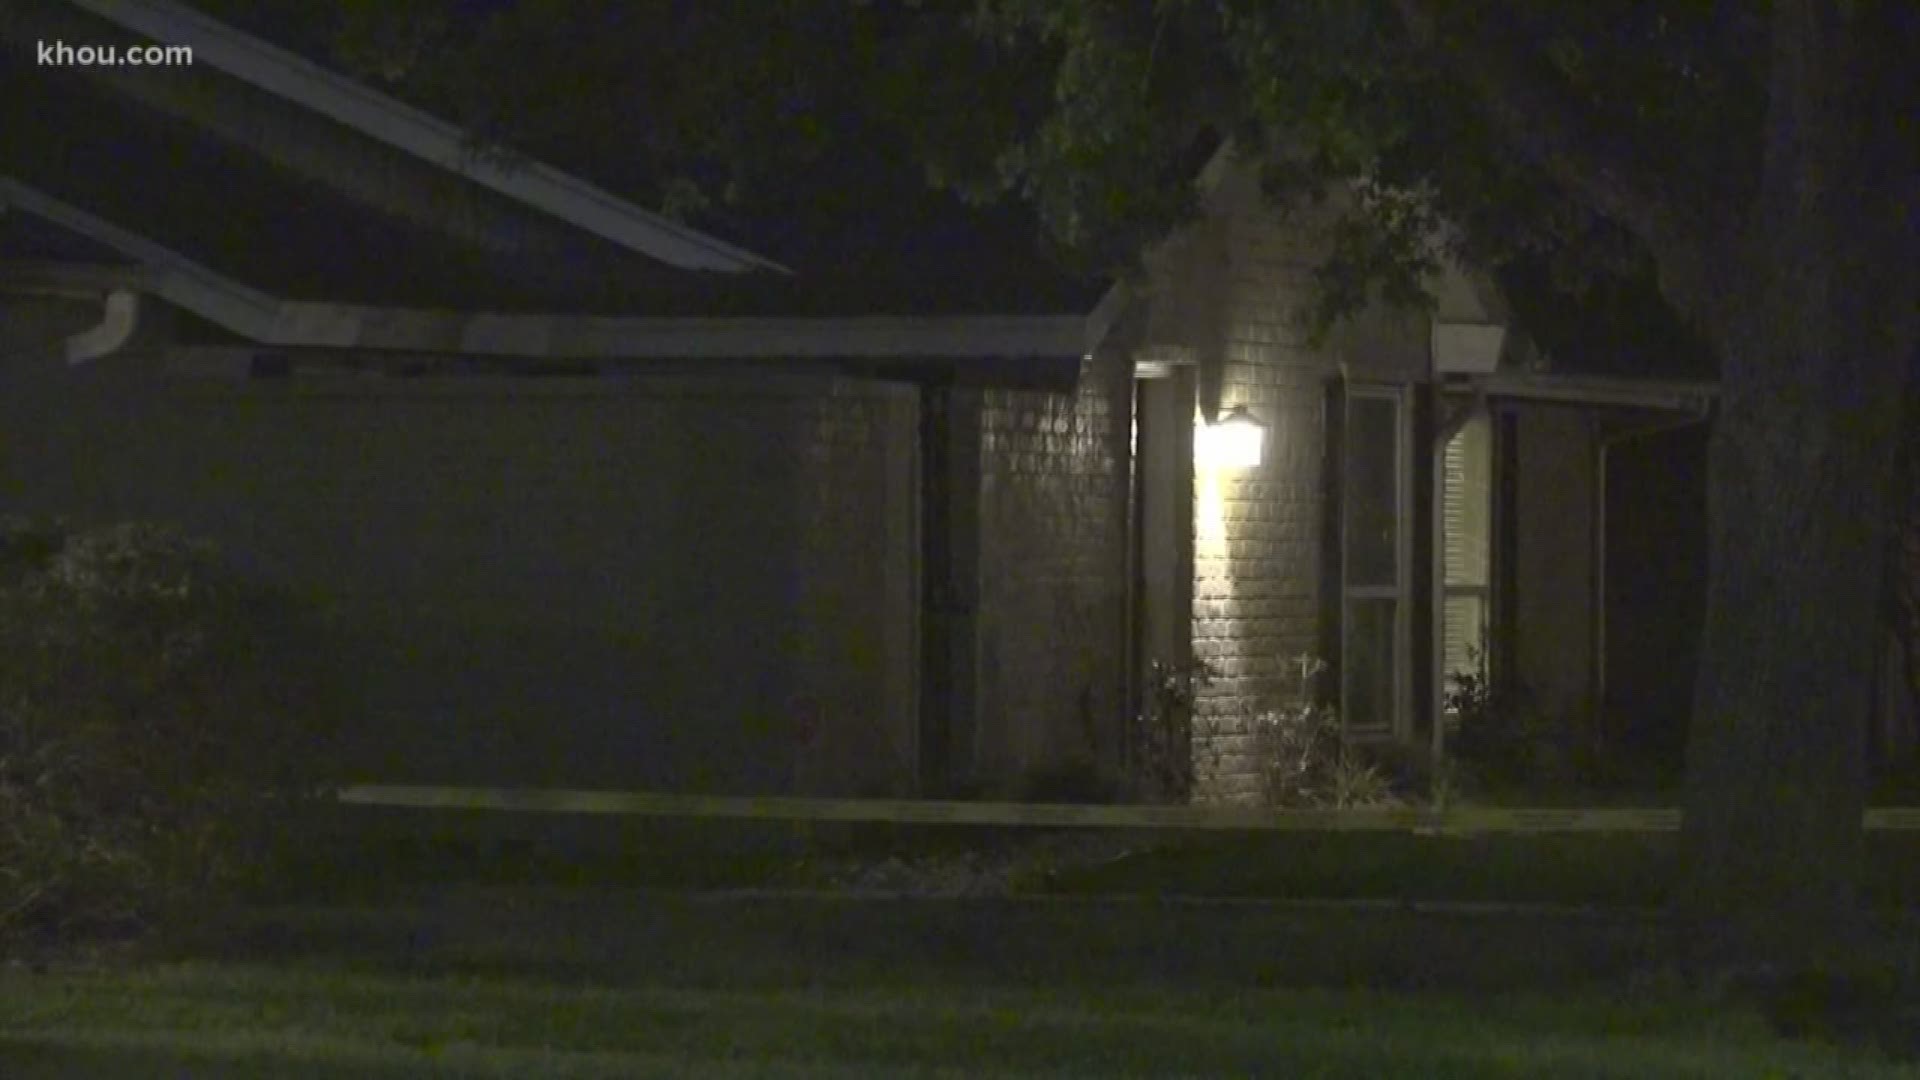 A young man was shot and killed when an argument broke out during a house party in west Houston near the Memorial area.